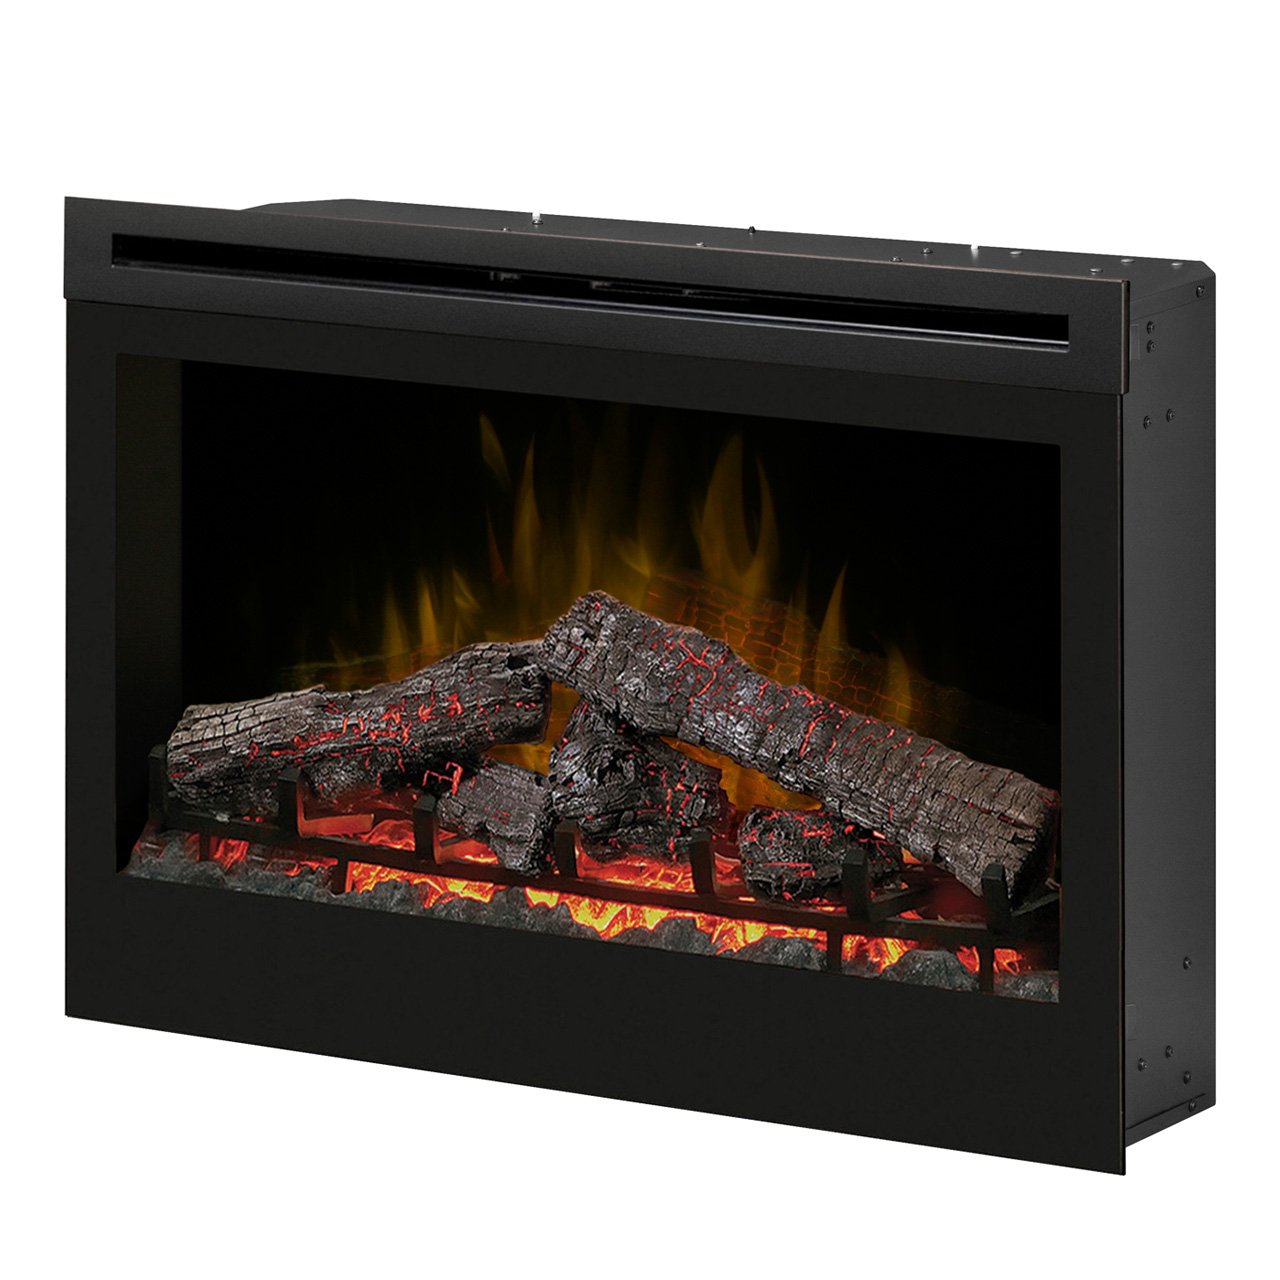 Gas Fireplace Manufacturers New Dimplex Df3033st 33 Inch Self Trimming Electric Fireplace Insert